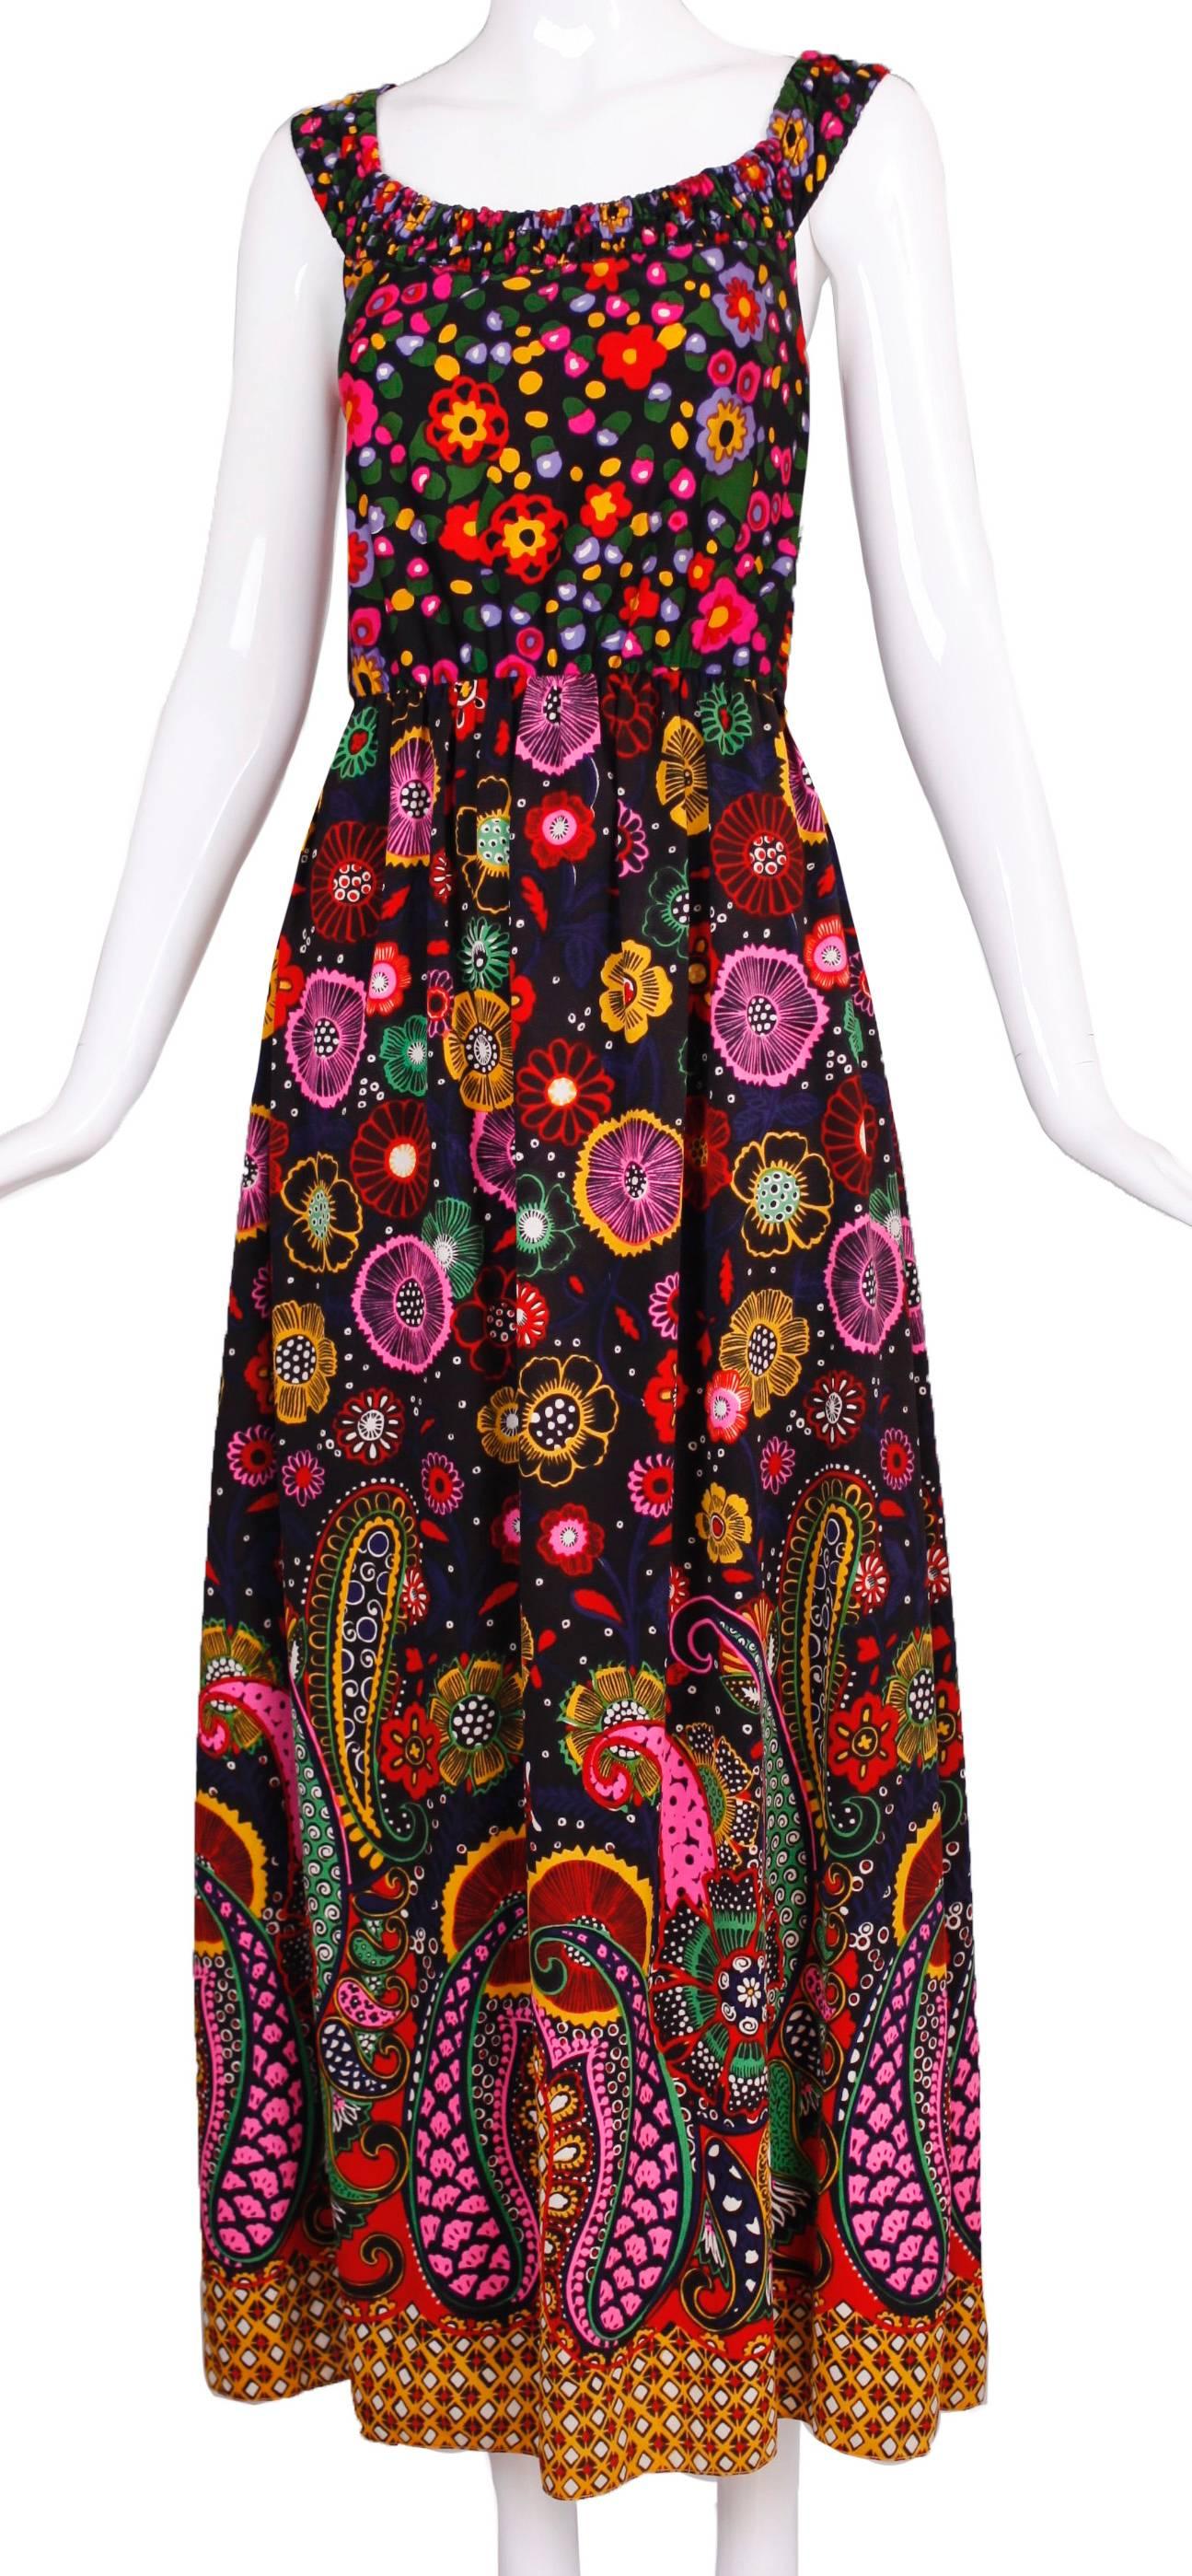 1970s Oscar de La Renta maxi dress with a psychedelic pattern. The straps are elastic, there is a zipper in the back and the skirt is lined in either rayon or silk. No fabric tag but my guess is that it is a silk and poly blend. Size tag is 6 but